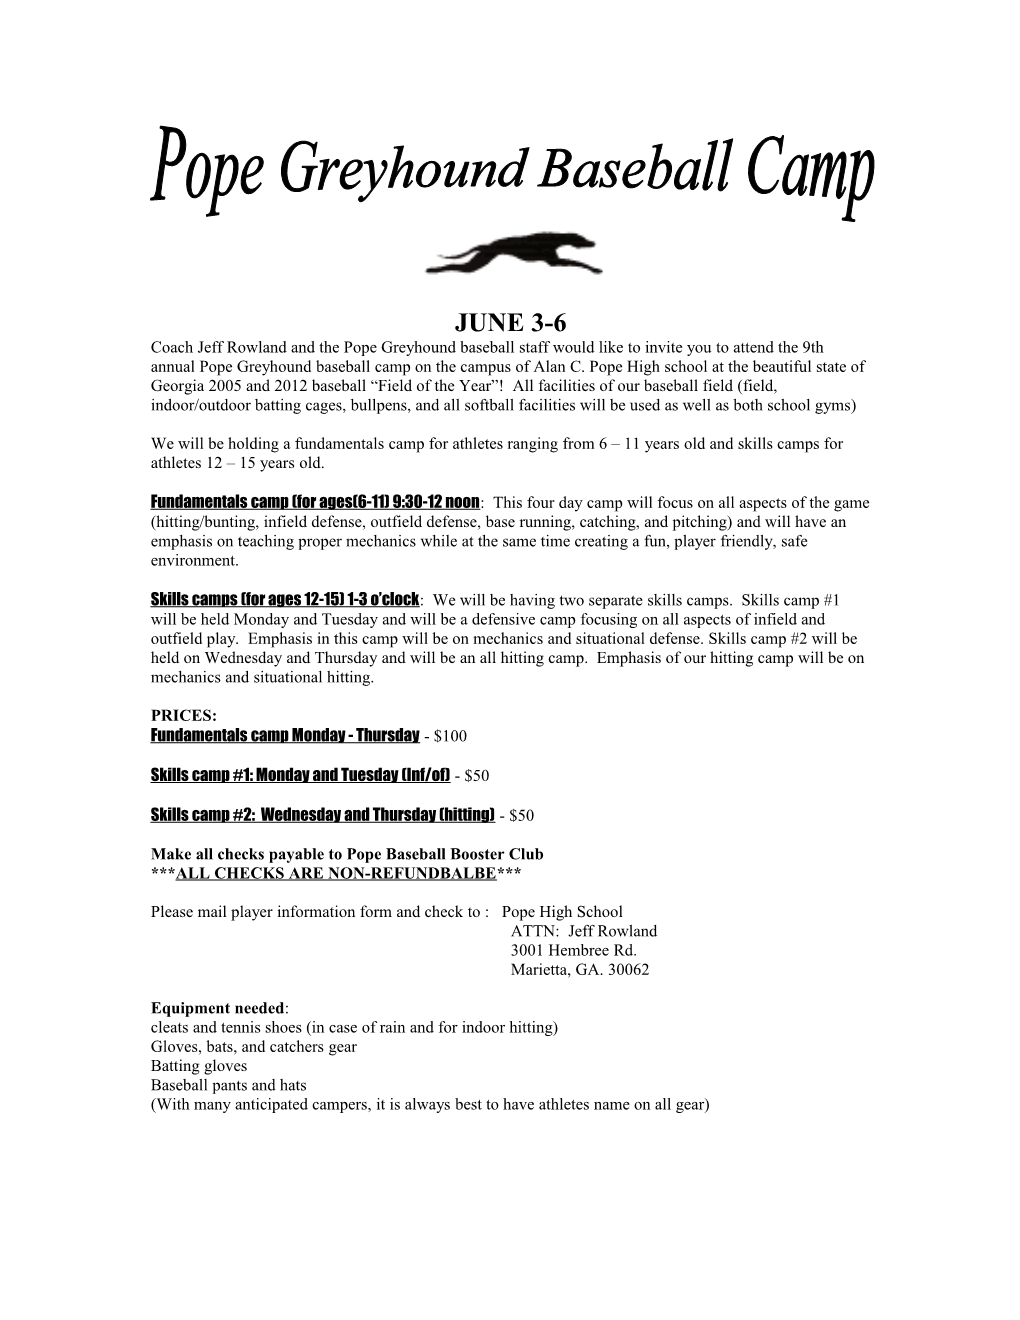 Coach Jeff Rowland and the Pope Greyhound Baseball Staff Would Like to Invite You to Attend